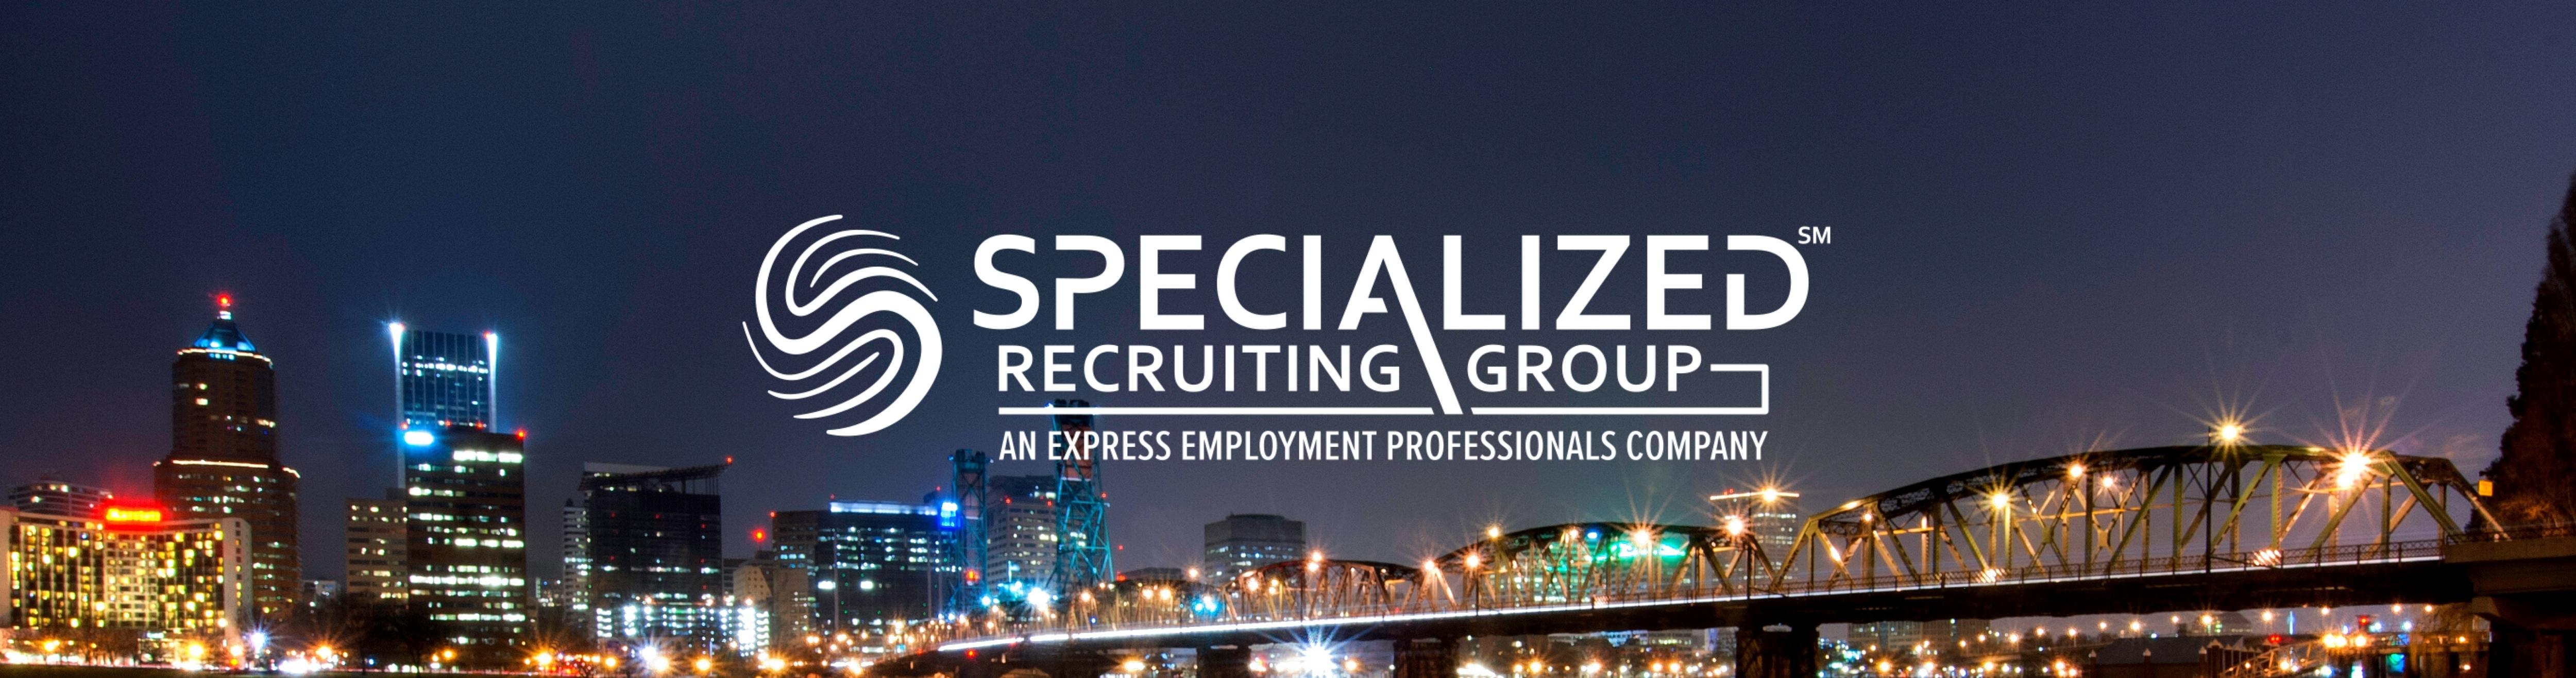 About Specialized Recruiting Group of Downtown Portland, OR